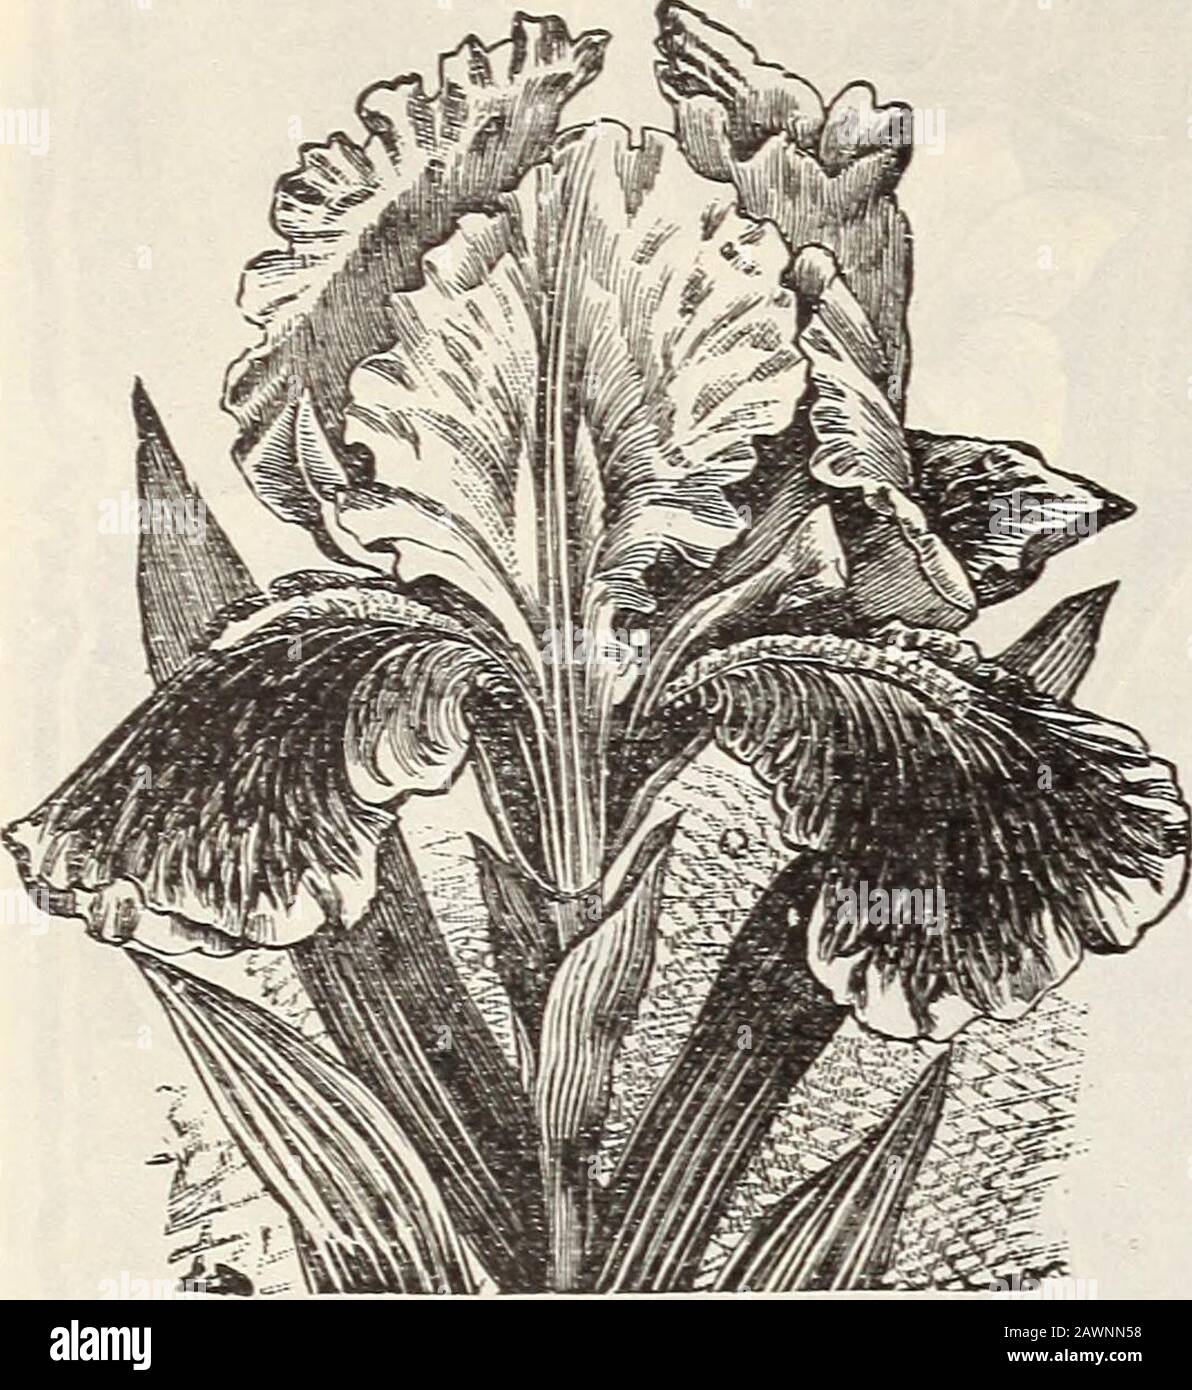 New floral guide : autumn 1901 . 26 The Conard & Jones Company, West Grove, Pa.. The Beautiful Spanish Iris These are line for blooming in pots in winter; they bear lovelylarge orchid-like flowers of most brilliant colors, blue, purple,yellow, pearly white and black, beautifully variegated, striped,spotted and  ruffled; they are also entirely hardy and splendidfor bedding in open ground, need no protection and will bloomfinely every spring without attention. We put the price verylow and hope all who can will give them a liberal trial. The Finest Named Varieties Peacock—Pure white, bright blue Stock Photo